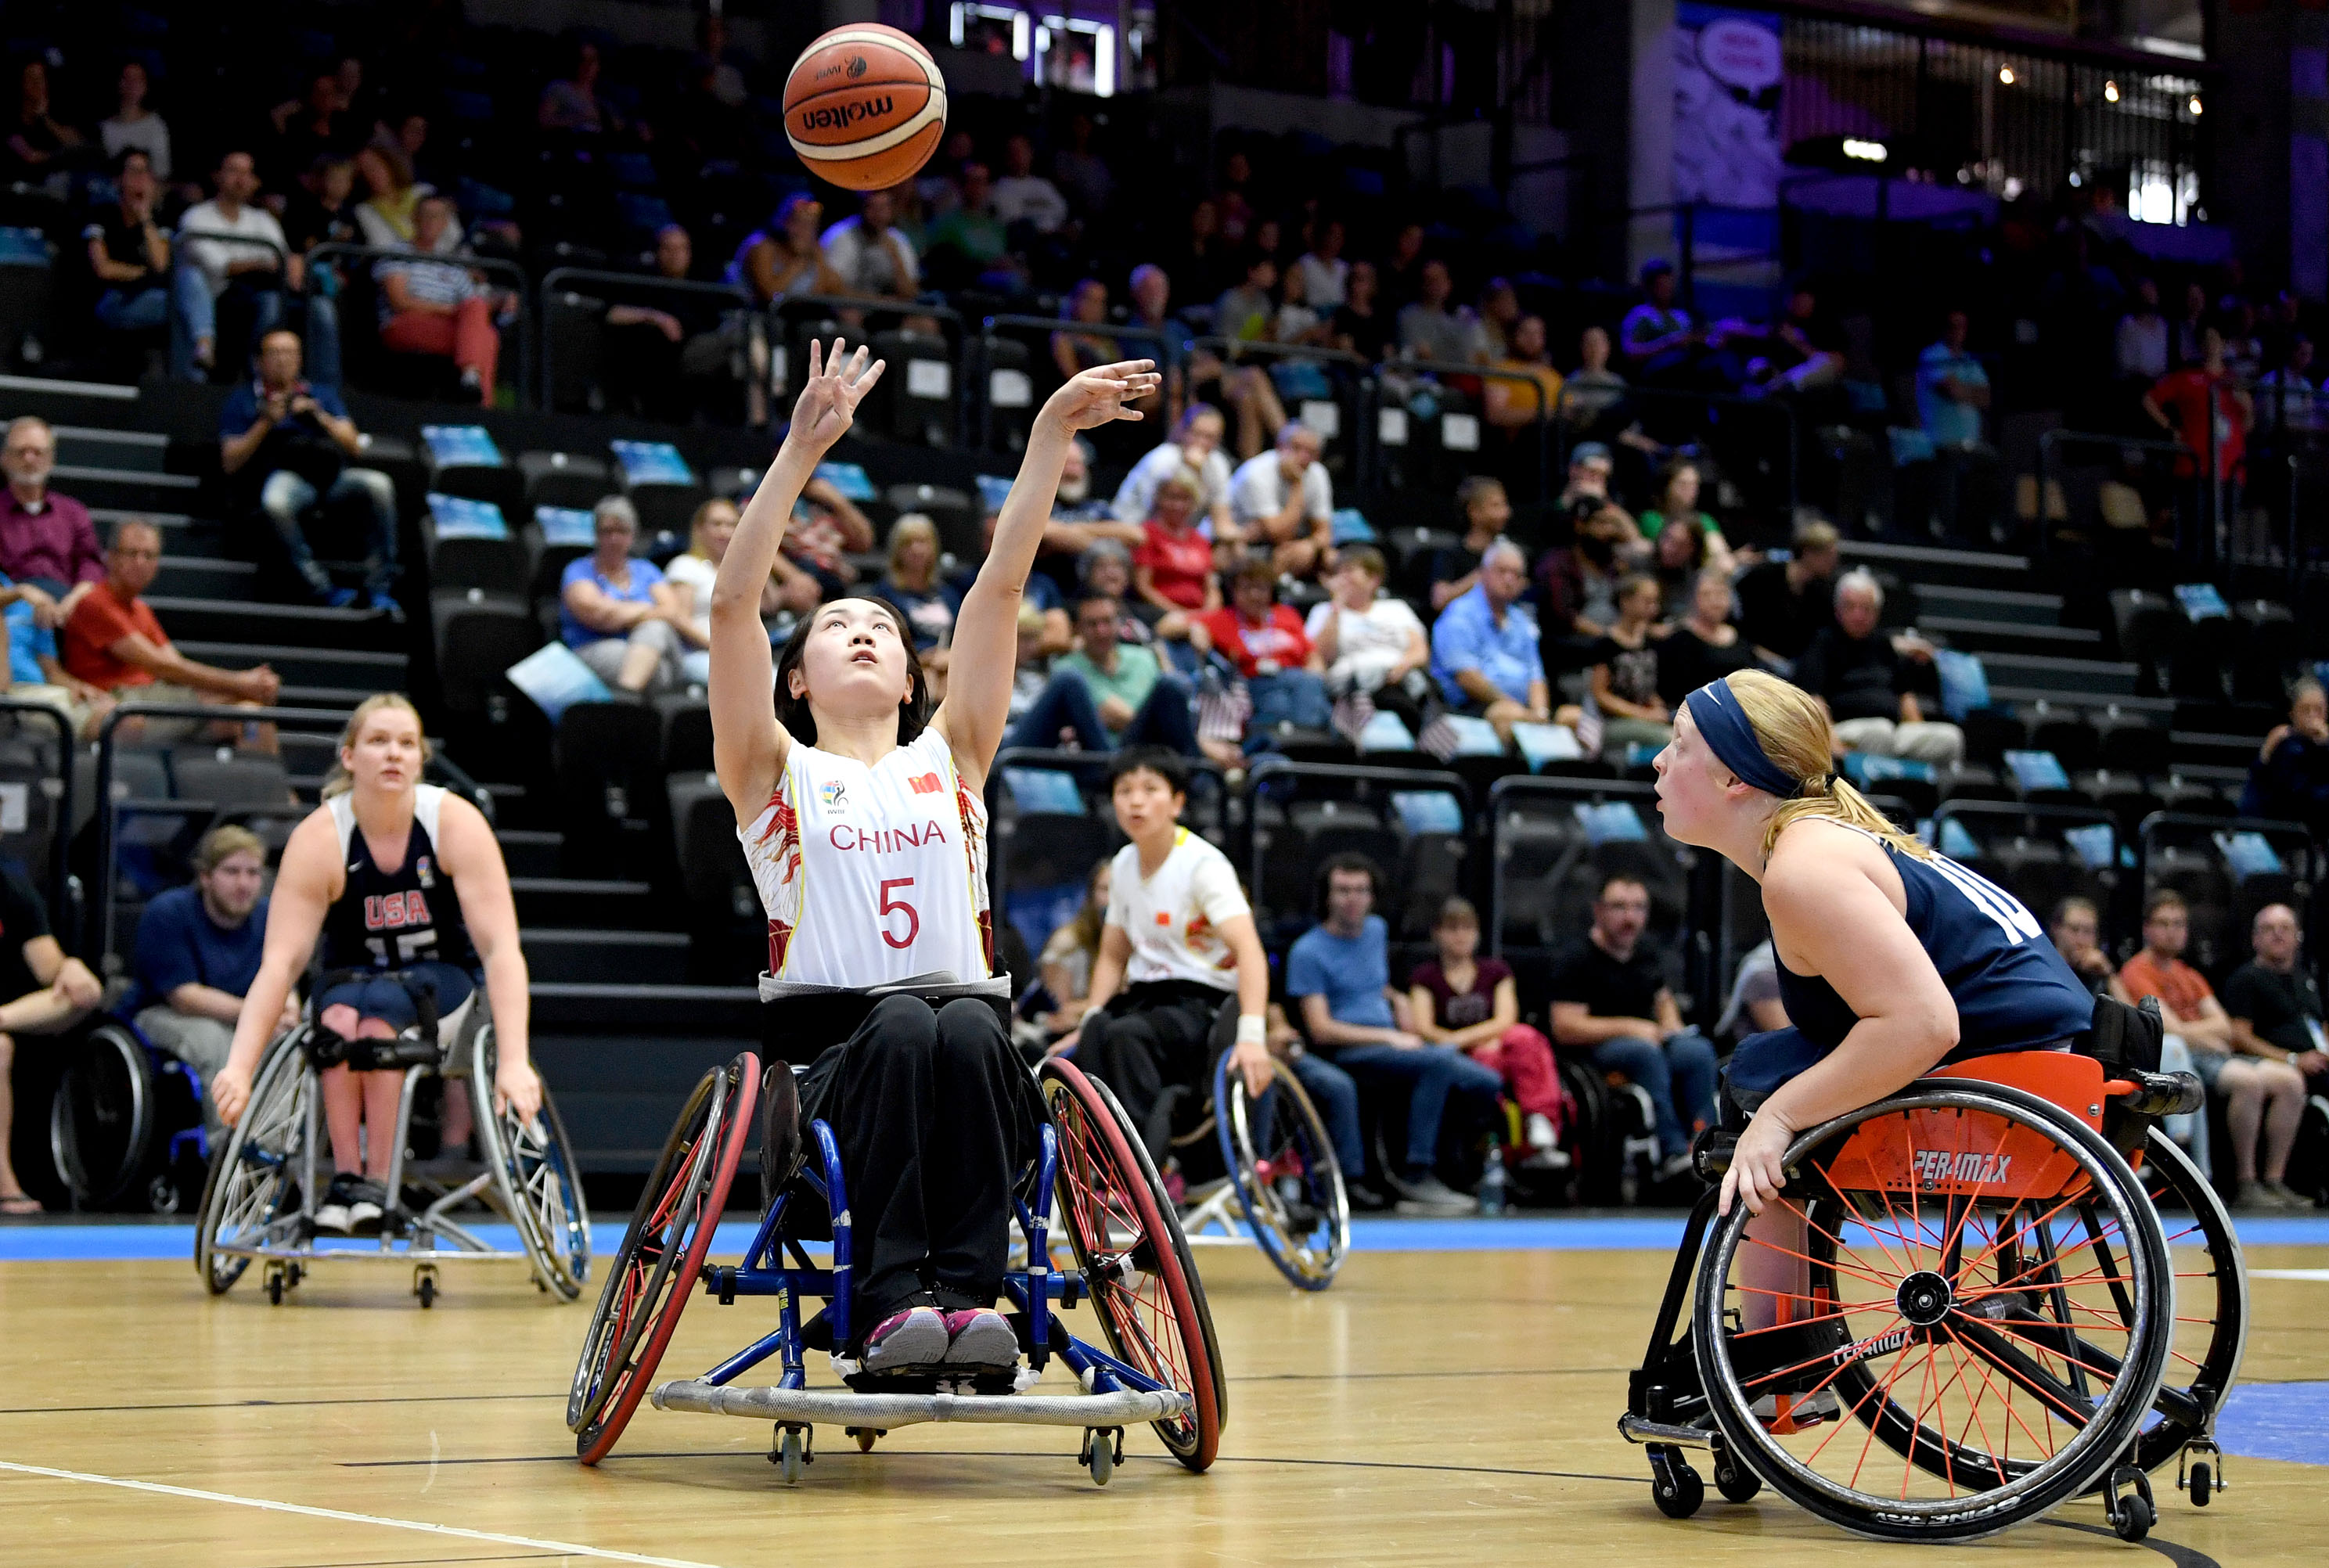 female wheelchair basketballer Xuemei Zhang challenges for the ball